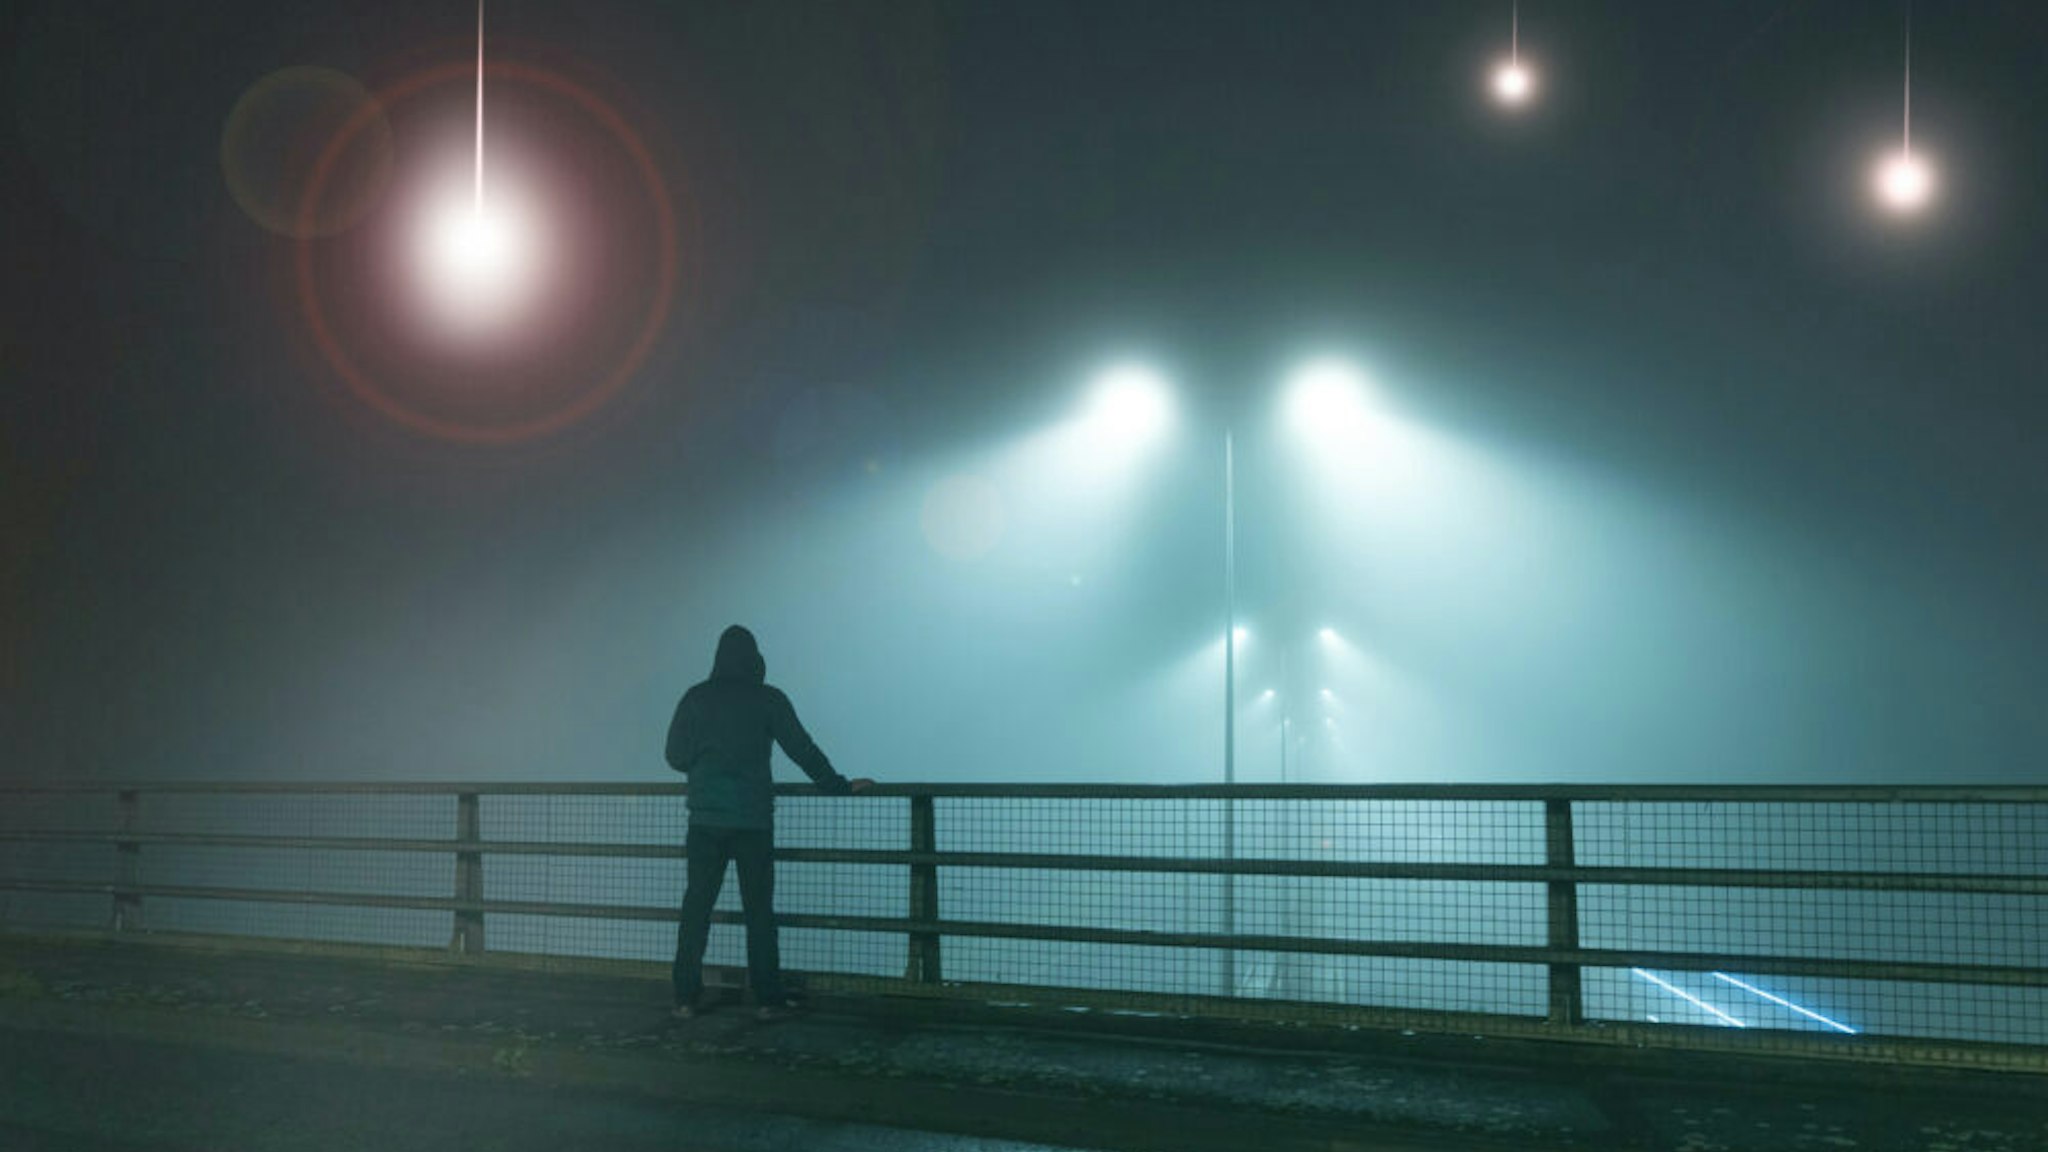 A hooded figure, standing with back to camera on a bridge, looking at UFO alien spaceships coming downfrom the sk., Street lights. On a foggy night.